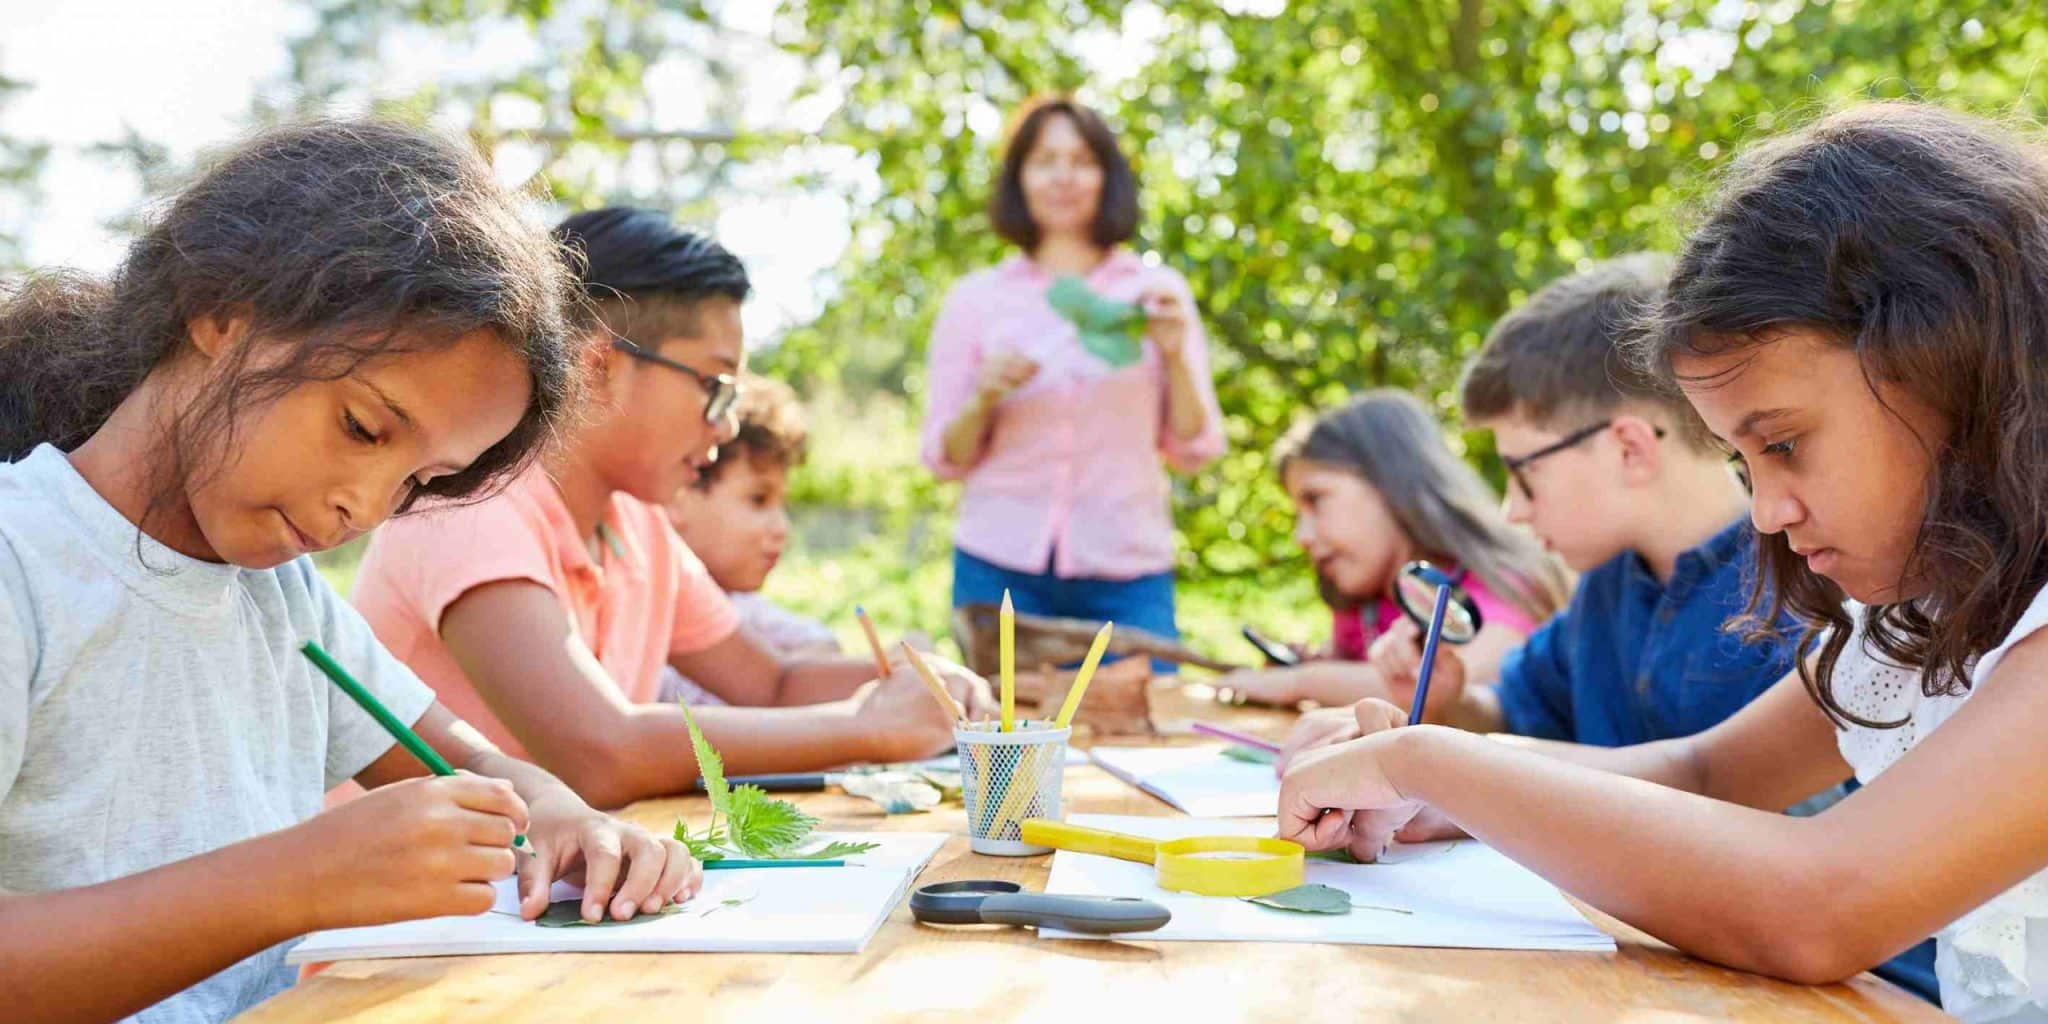 Children at a table drawing with pencils - an engaging outdoor learning activity fostering creativity and artistic expression